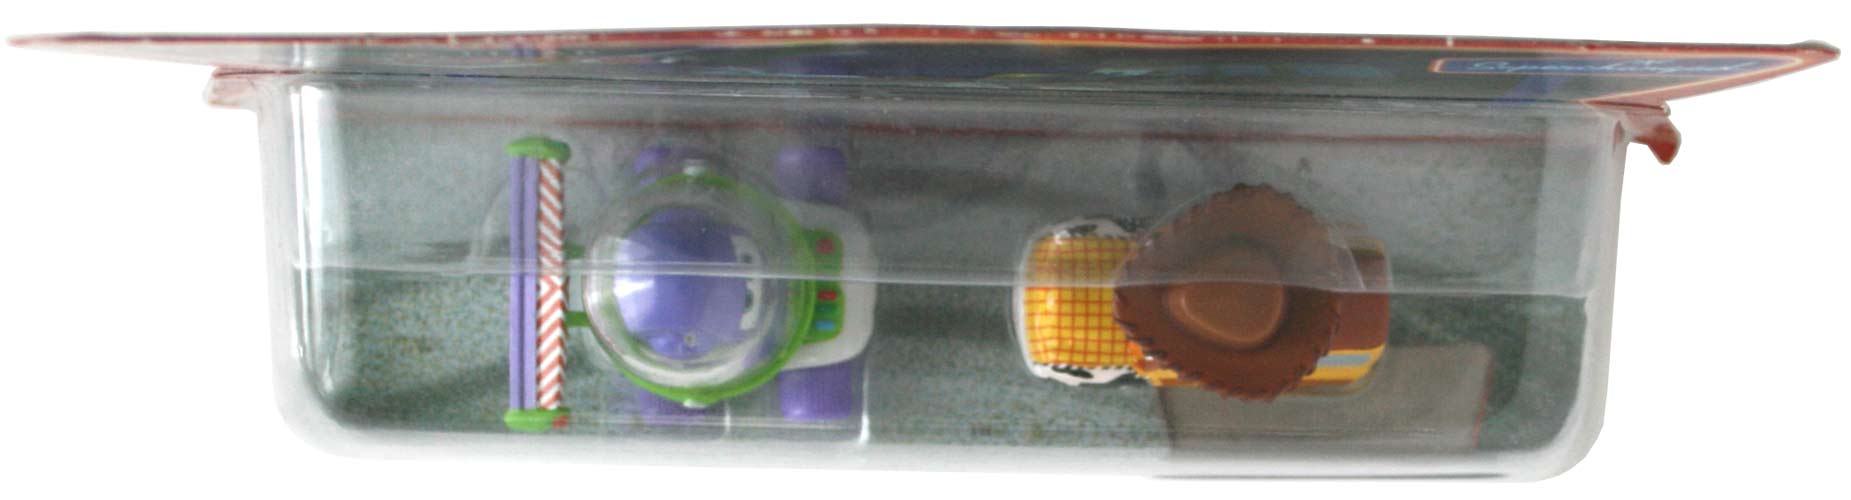 Mattel : Cars Supercharged - Buzz & Woody (2007) Packaging